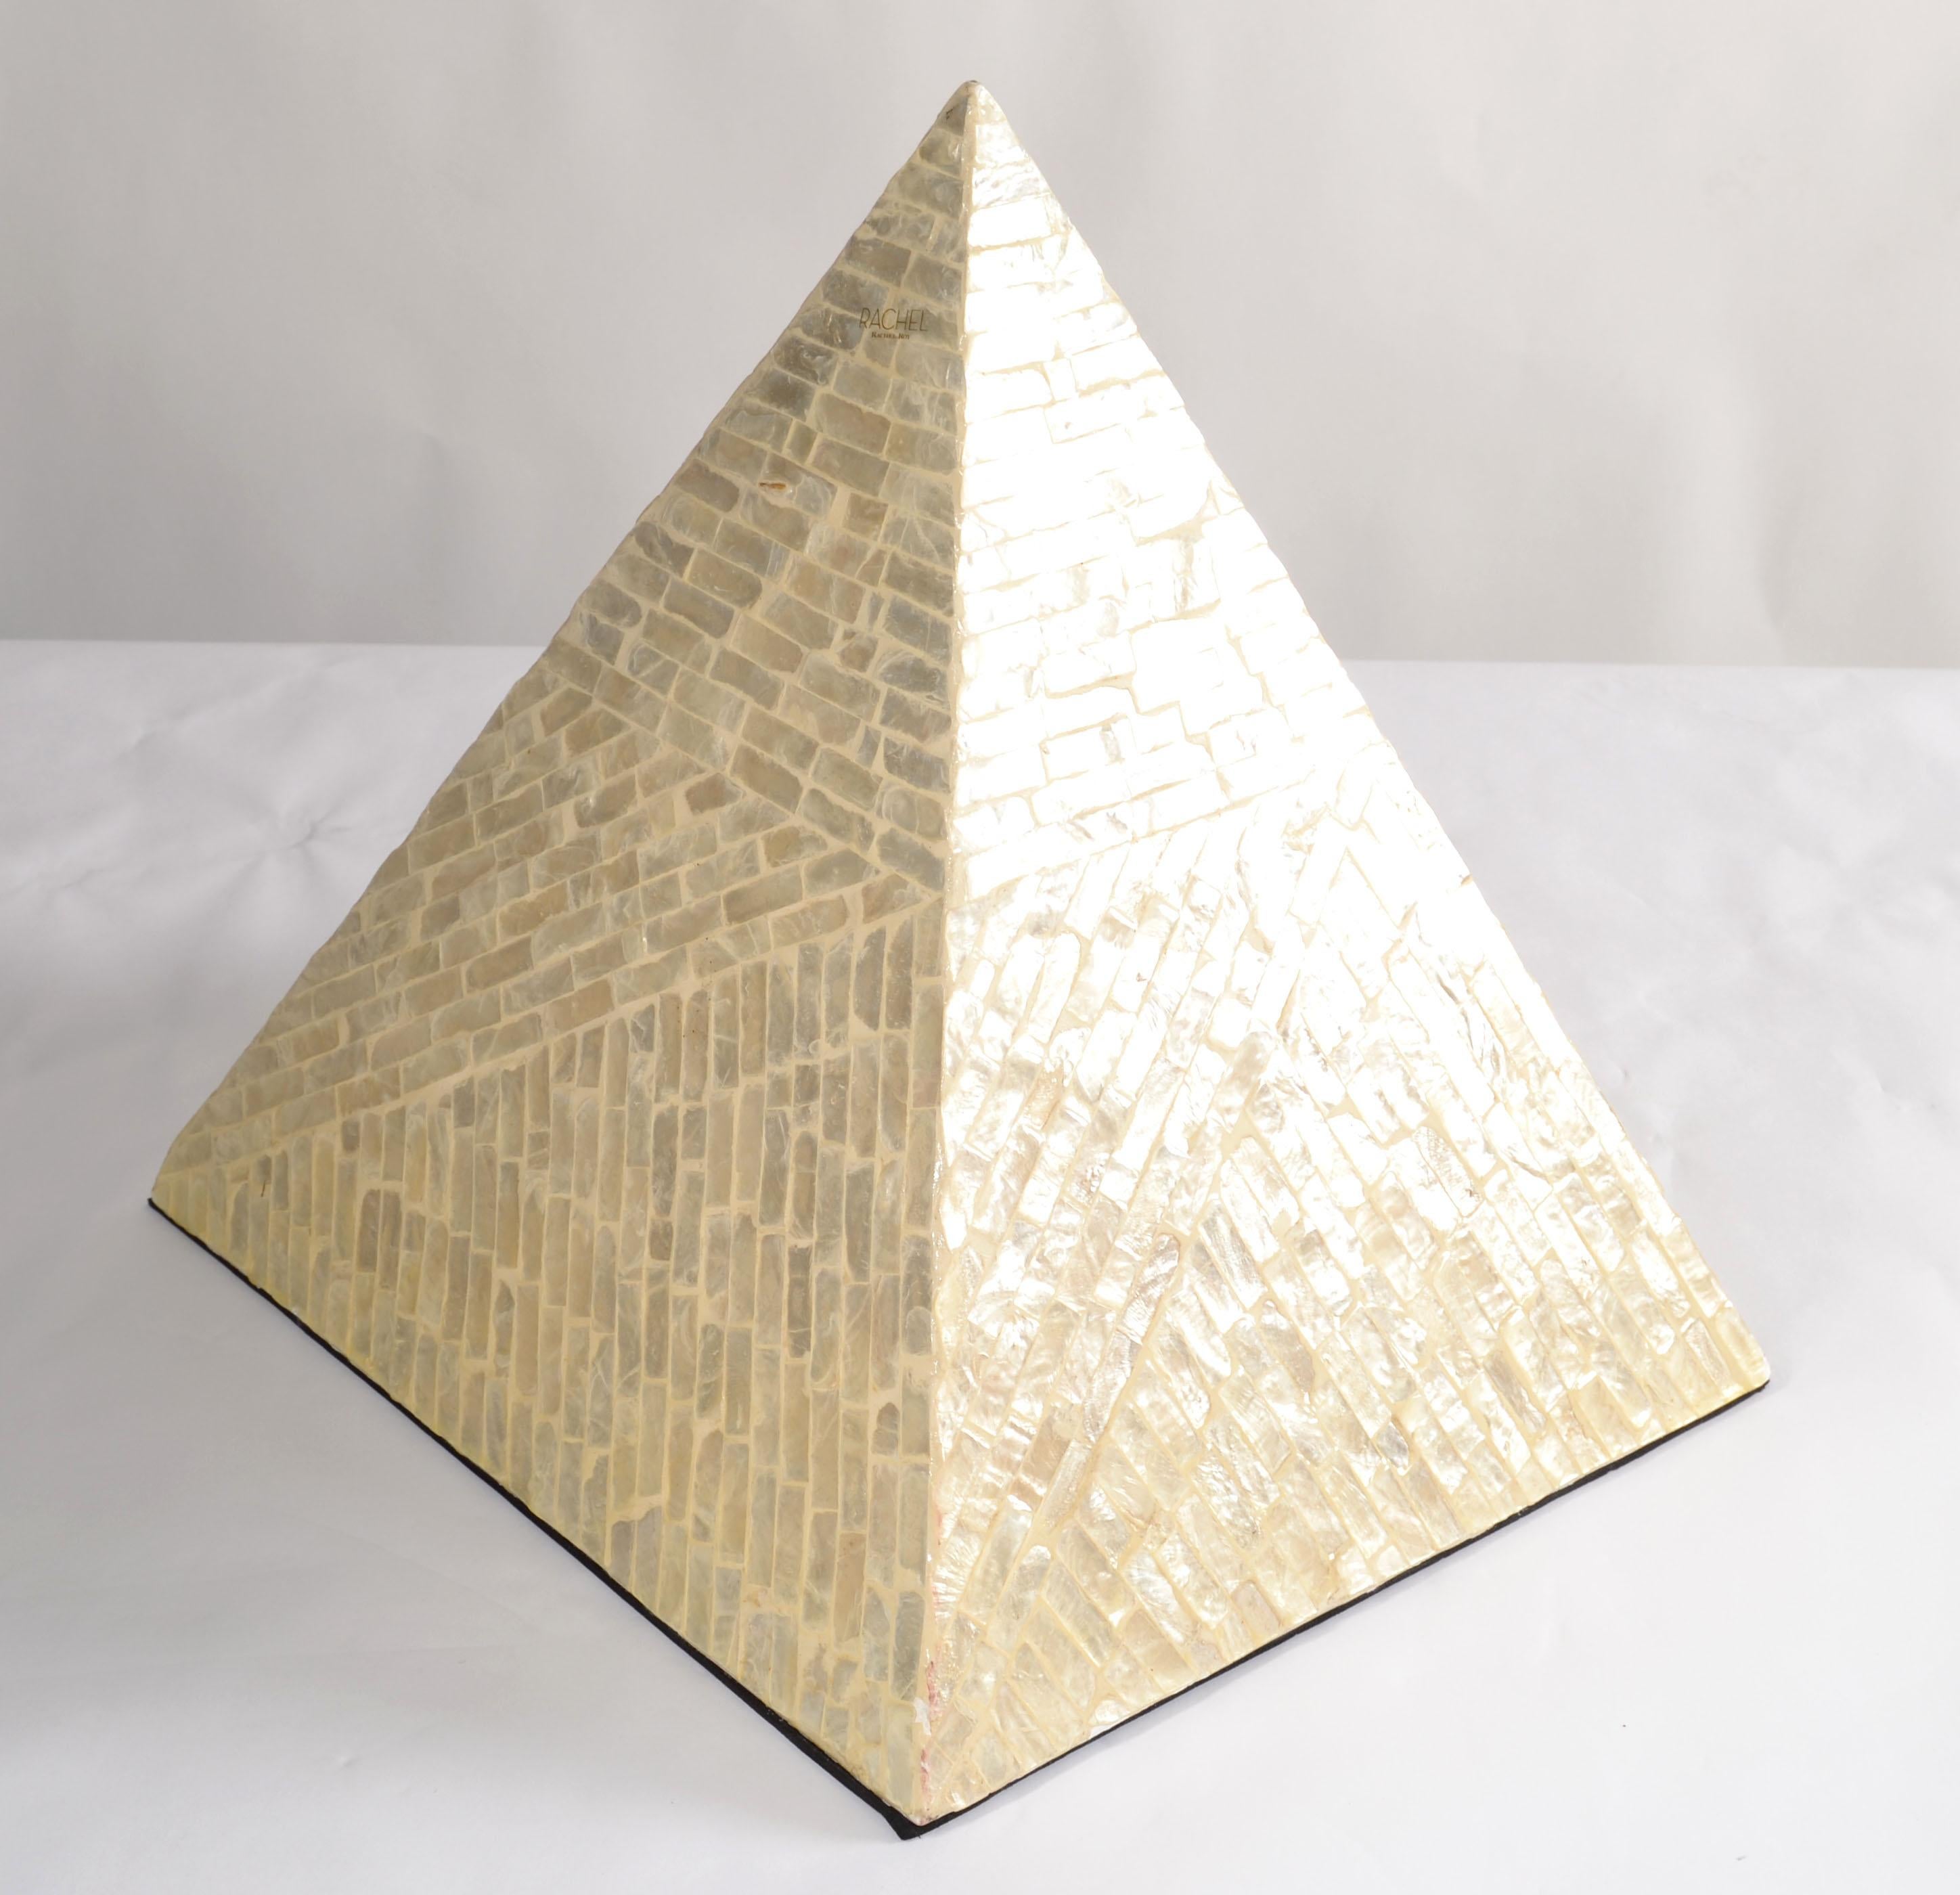 Mother-of-Pearl 1980s Italian Pyramid Mother Of Pearl Wood Sculpture Decorative Object Fine Art  For Sale